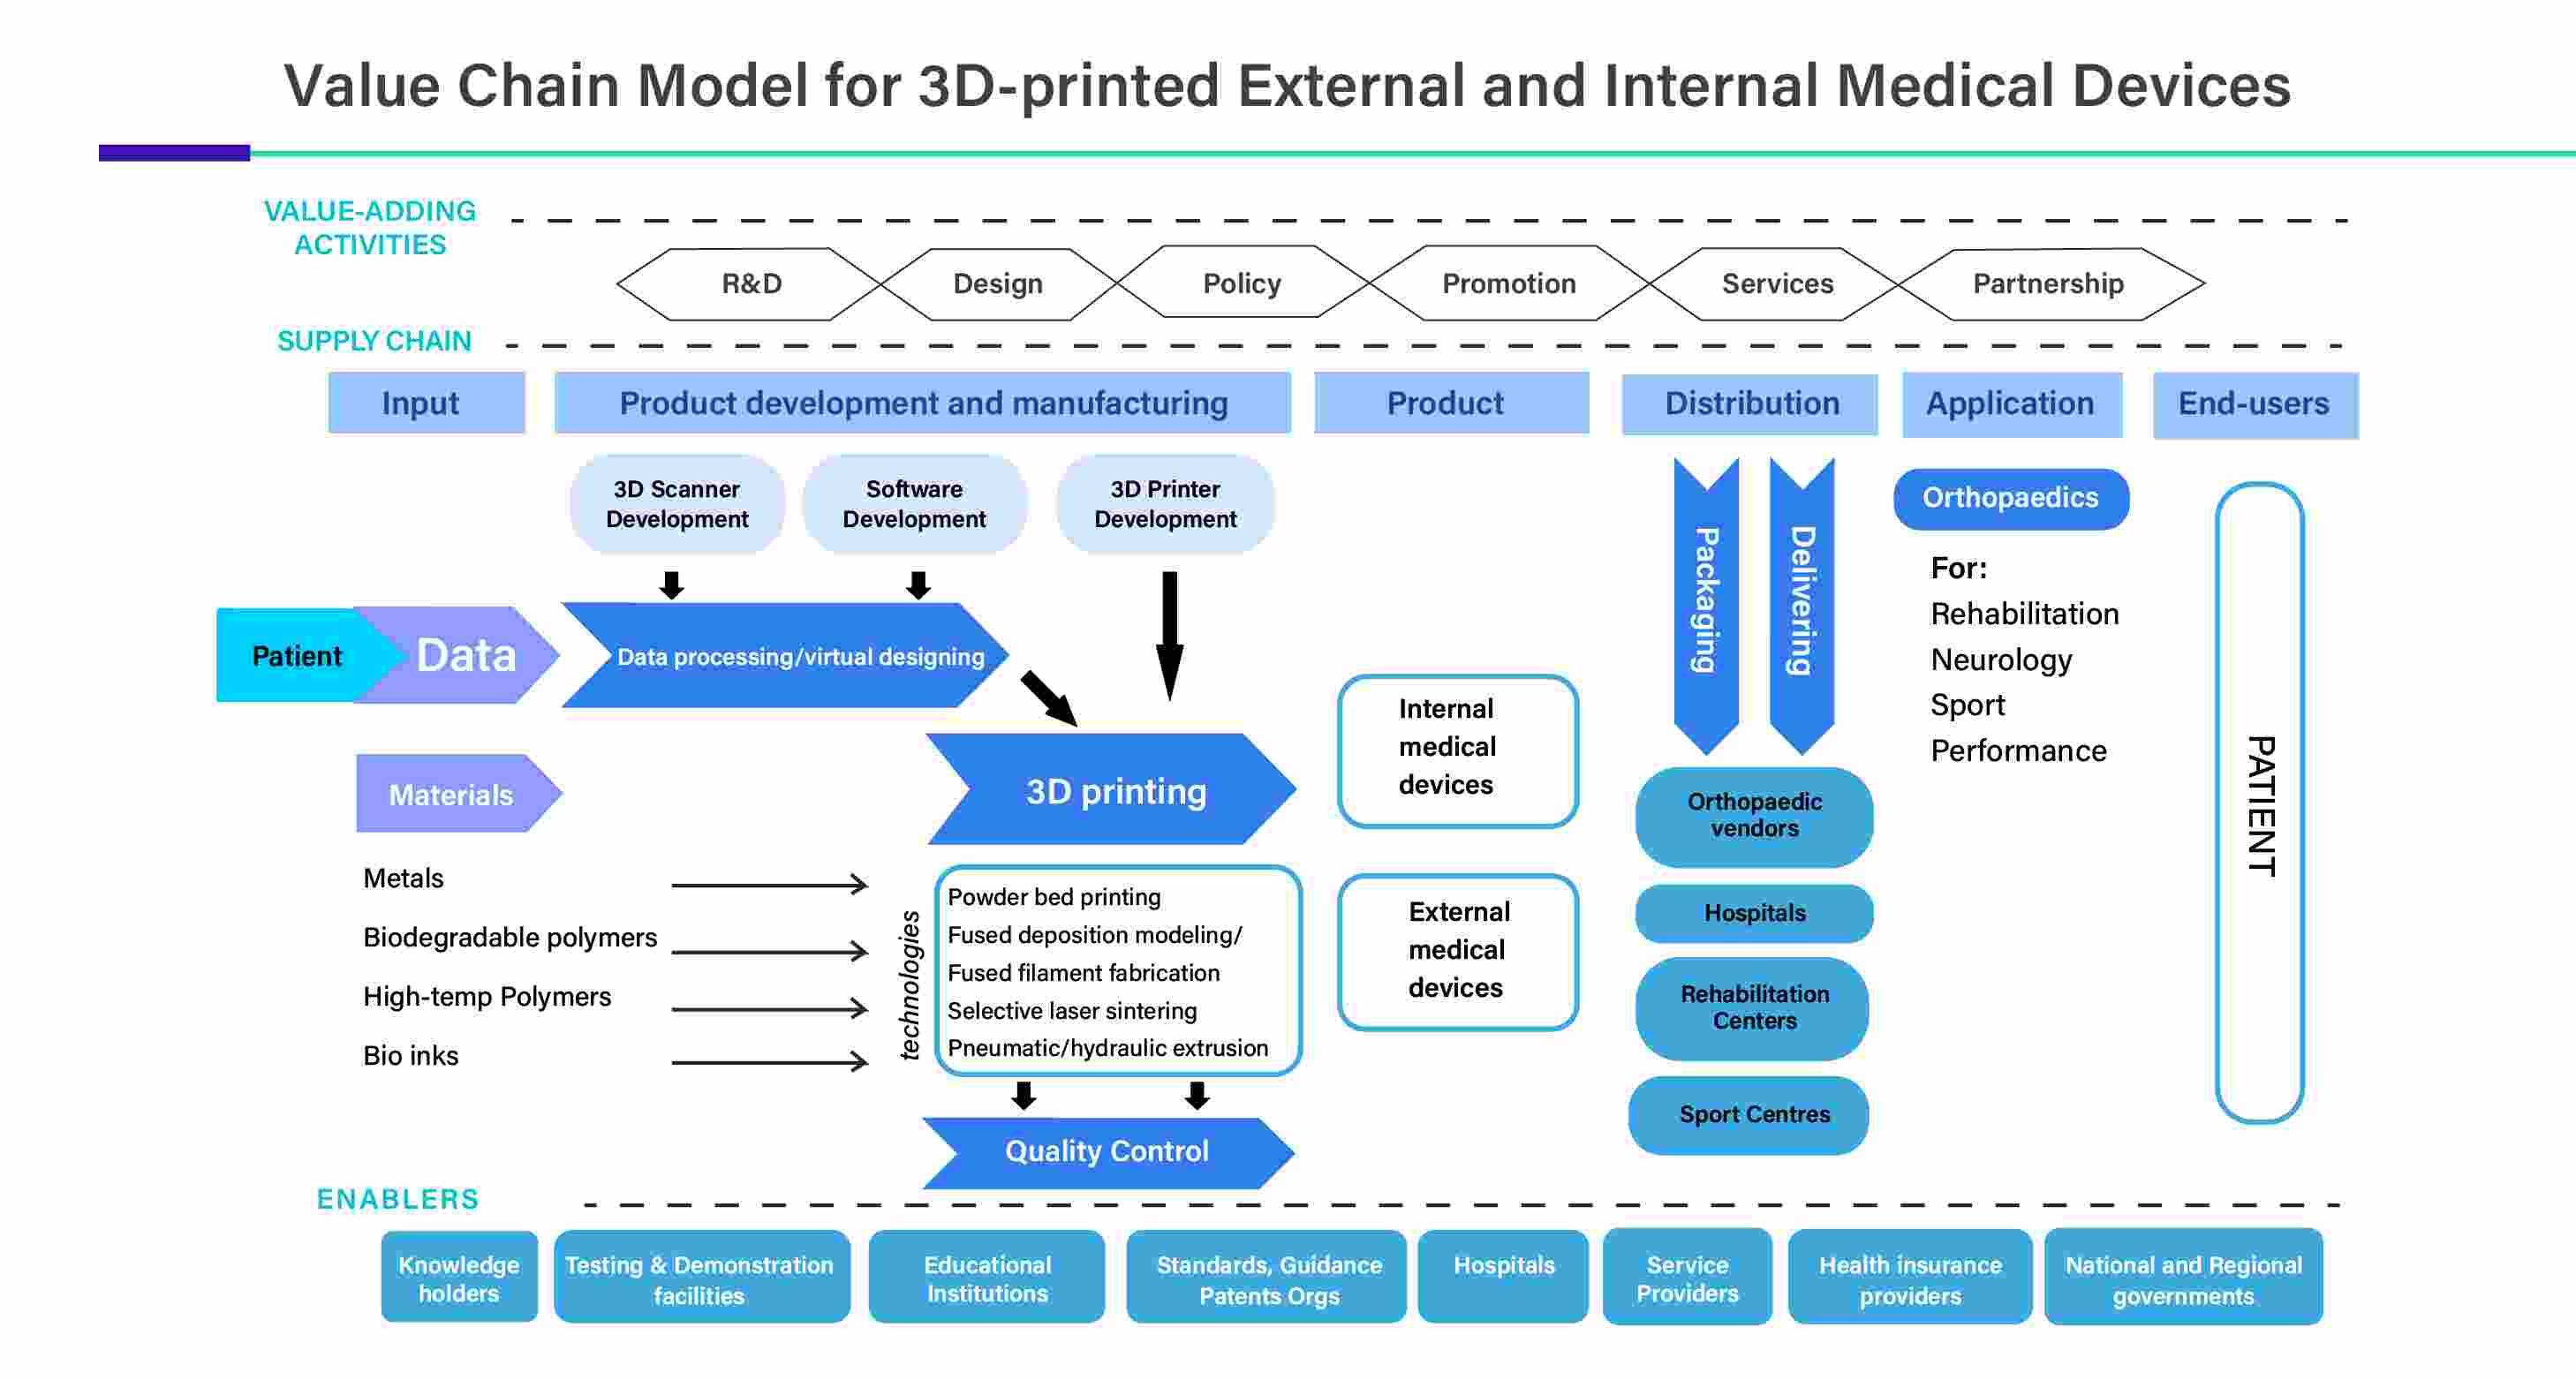 Value Chain Model For 3D-printed External and Internal Medical Devices